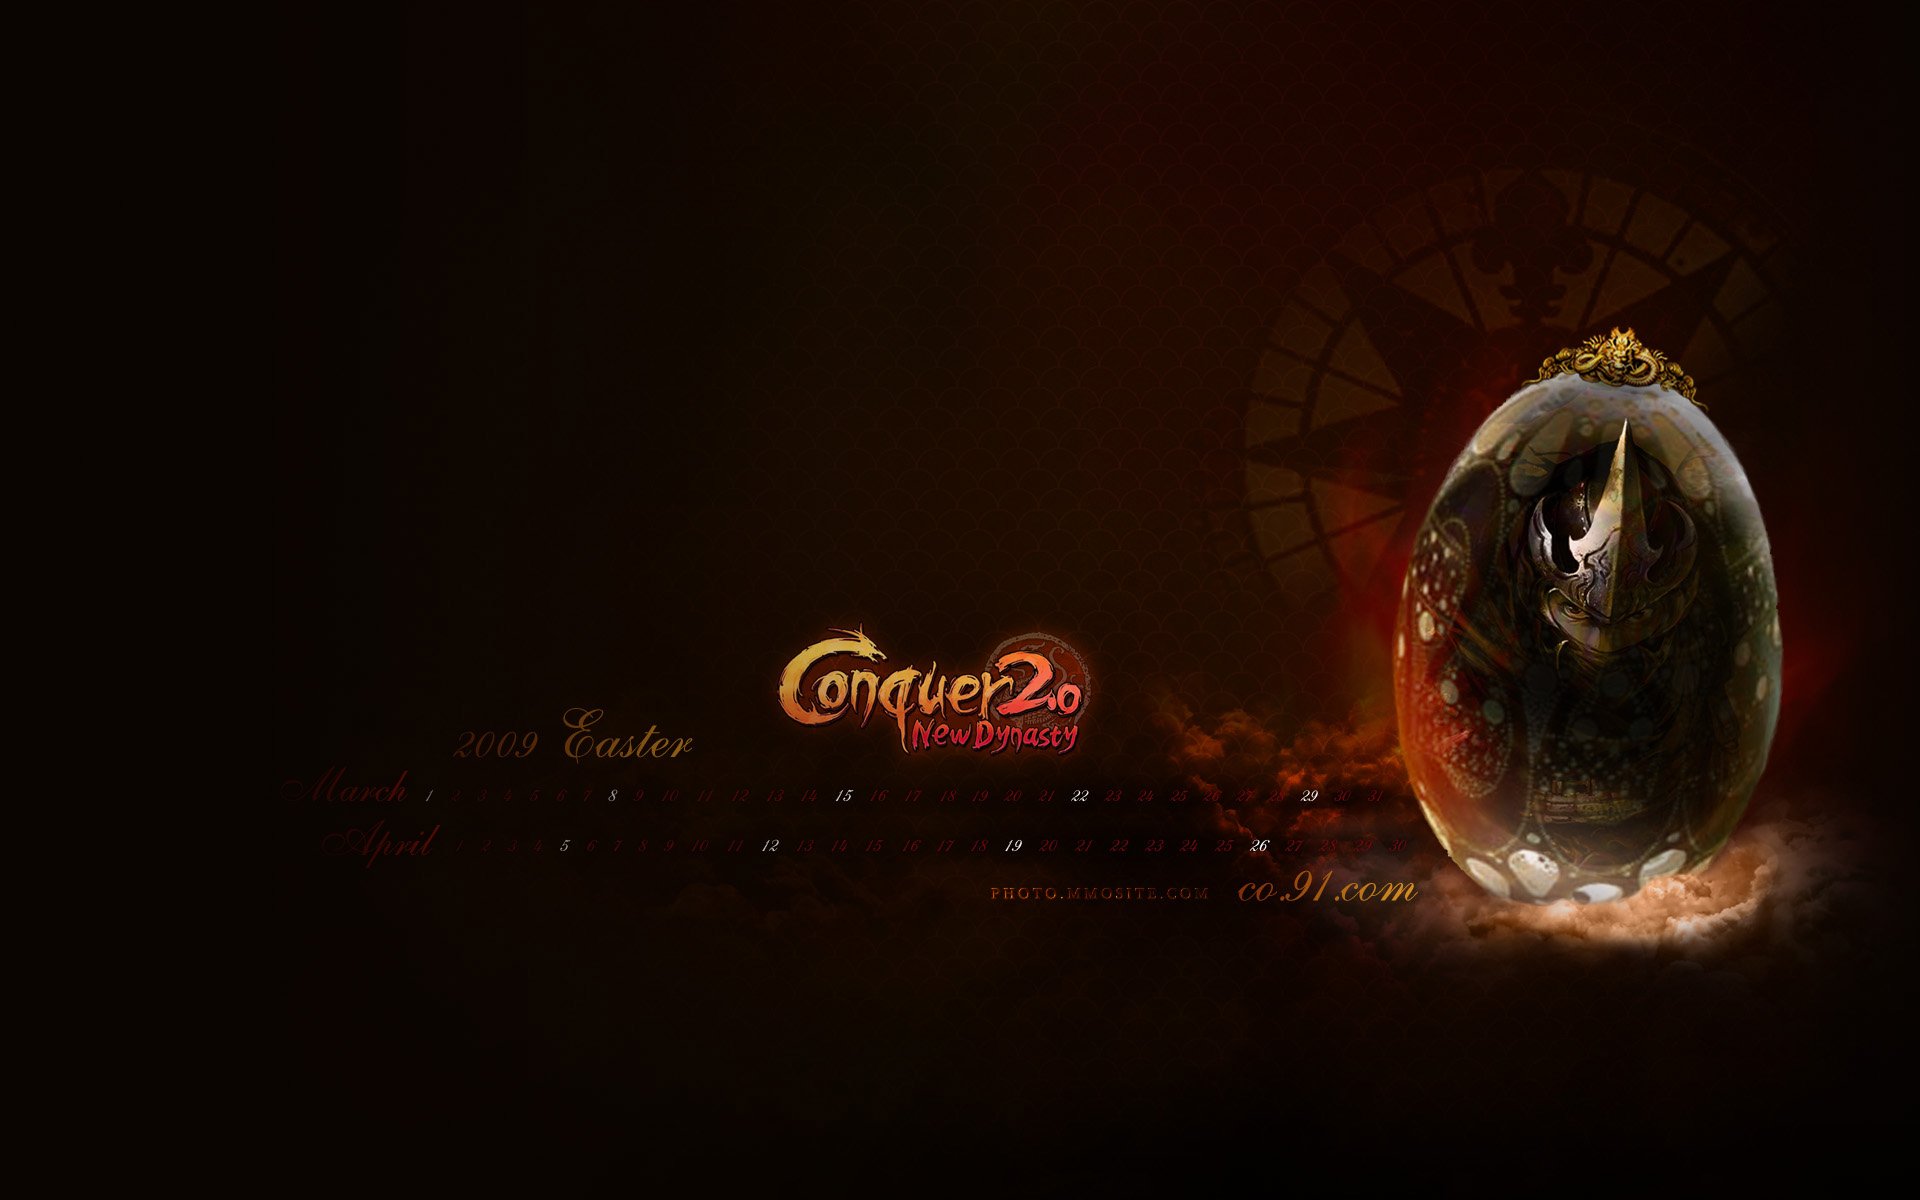 conquer, Online, Fantasy, Mmo, Rpg, Martial, Action, Fighting, 1cono, Poster Wallpaper